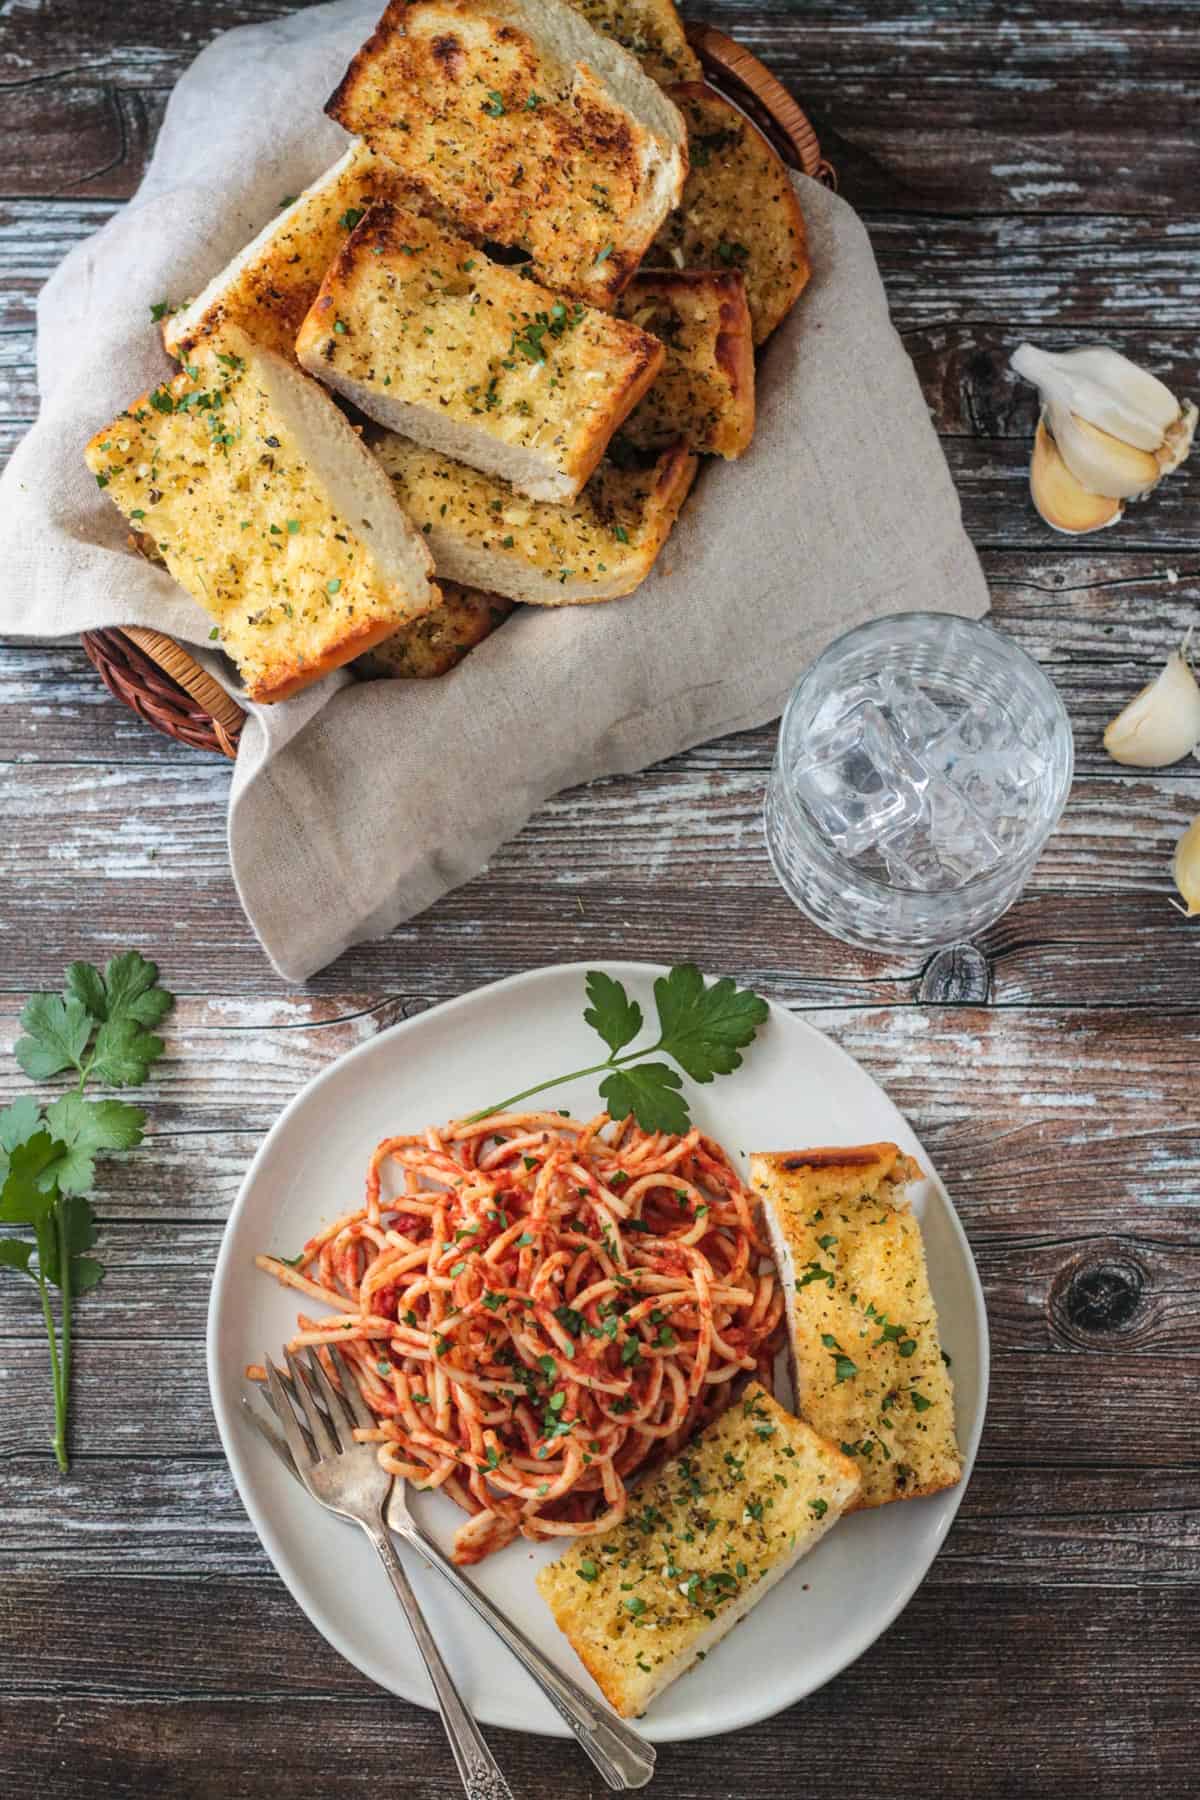 Plate of pasta with garlic bread in front of a basket full of more bread slices.